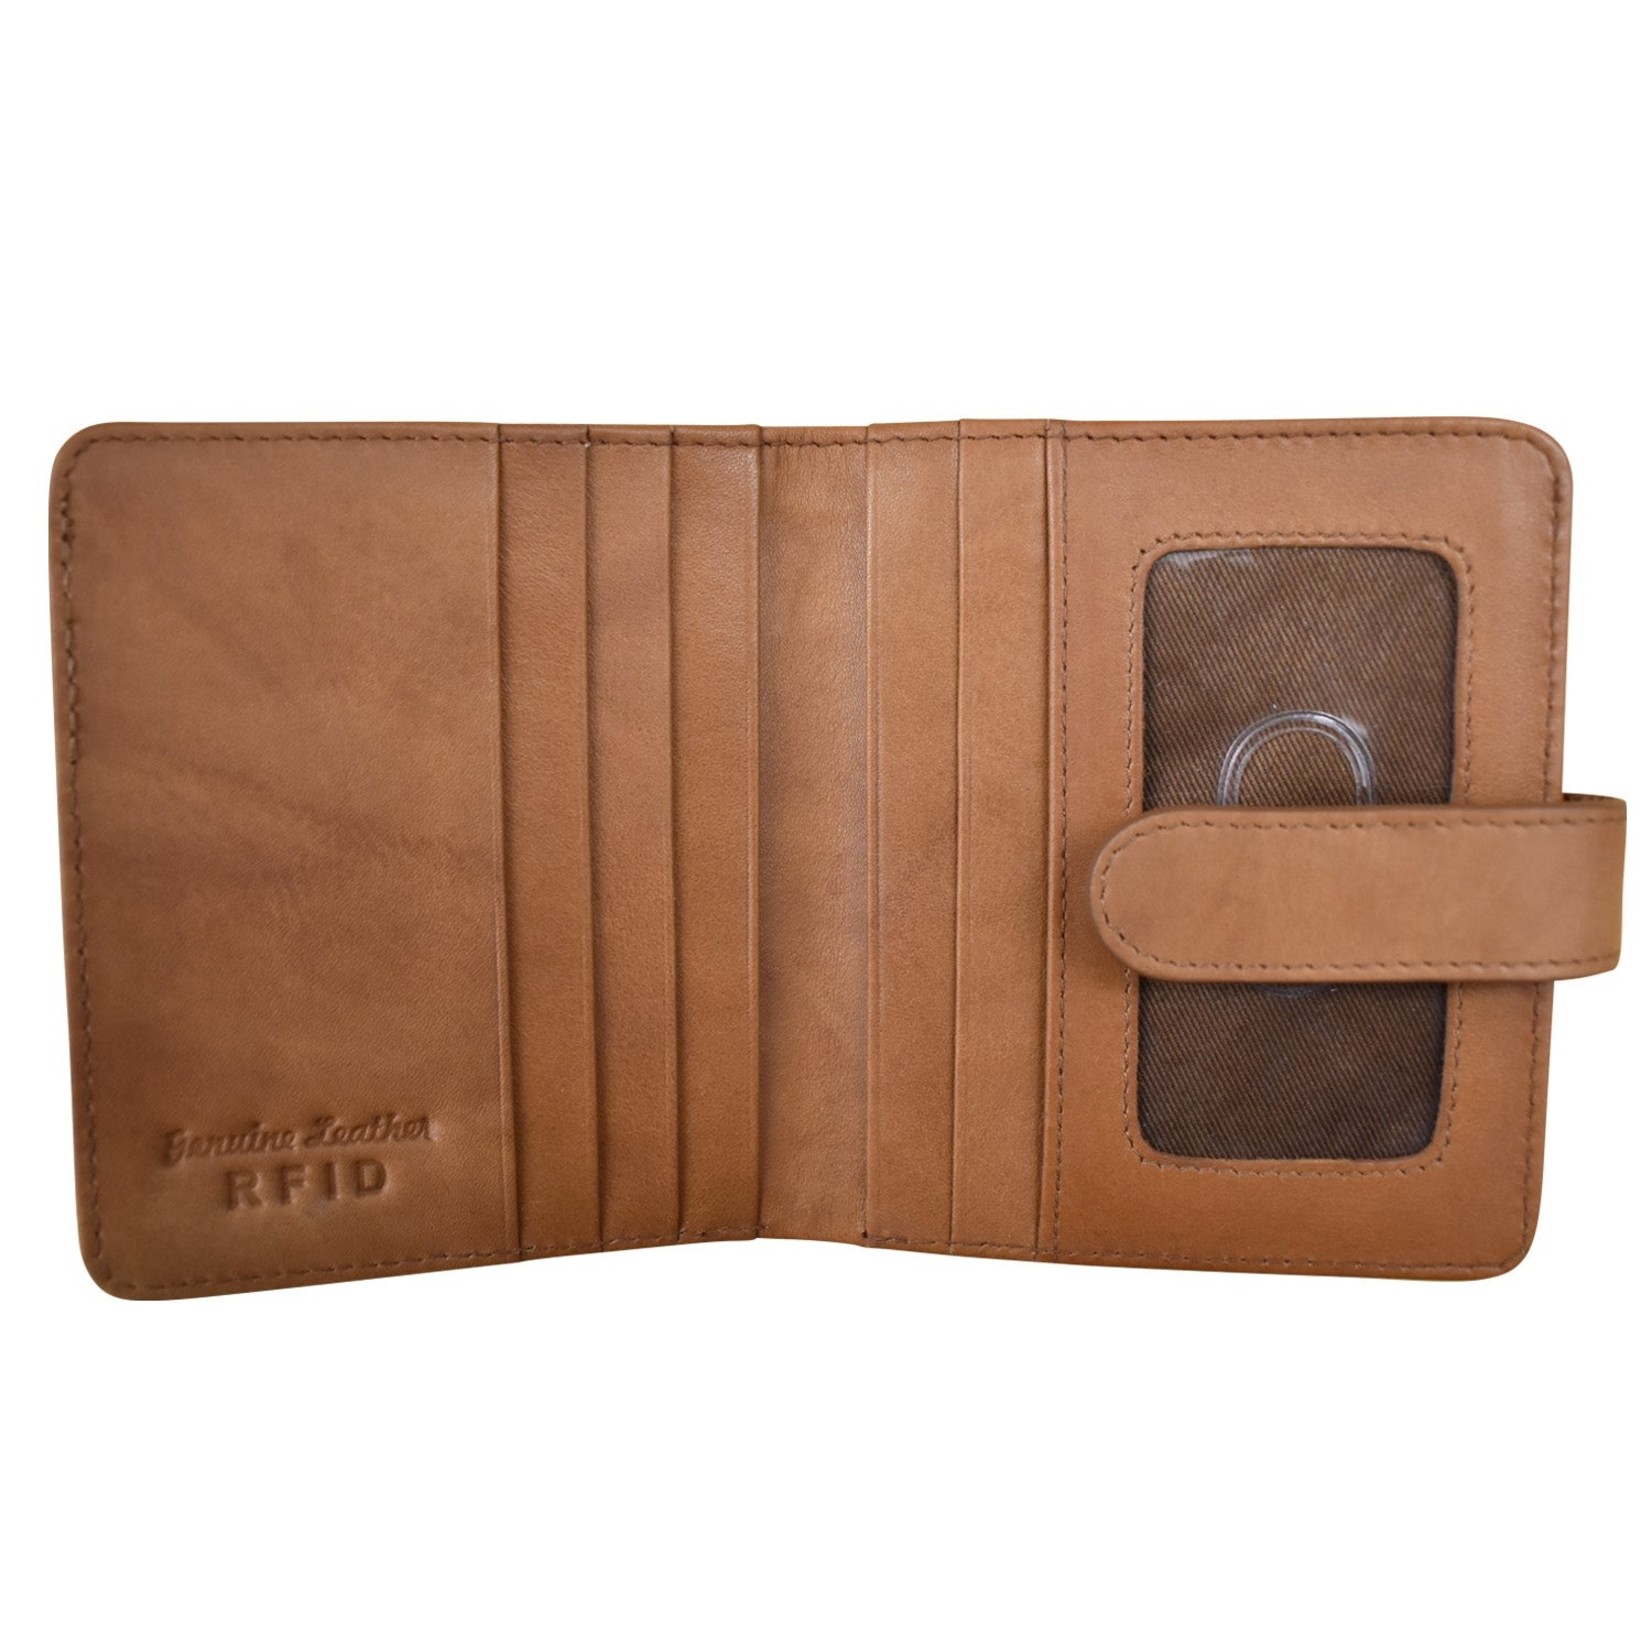 Leather Handbags and Accessories 7301 Antique Saddle - RFID Small Wallet